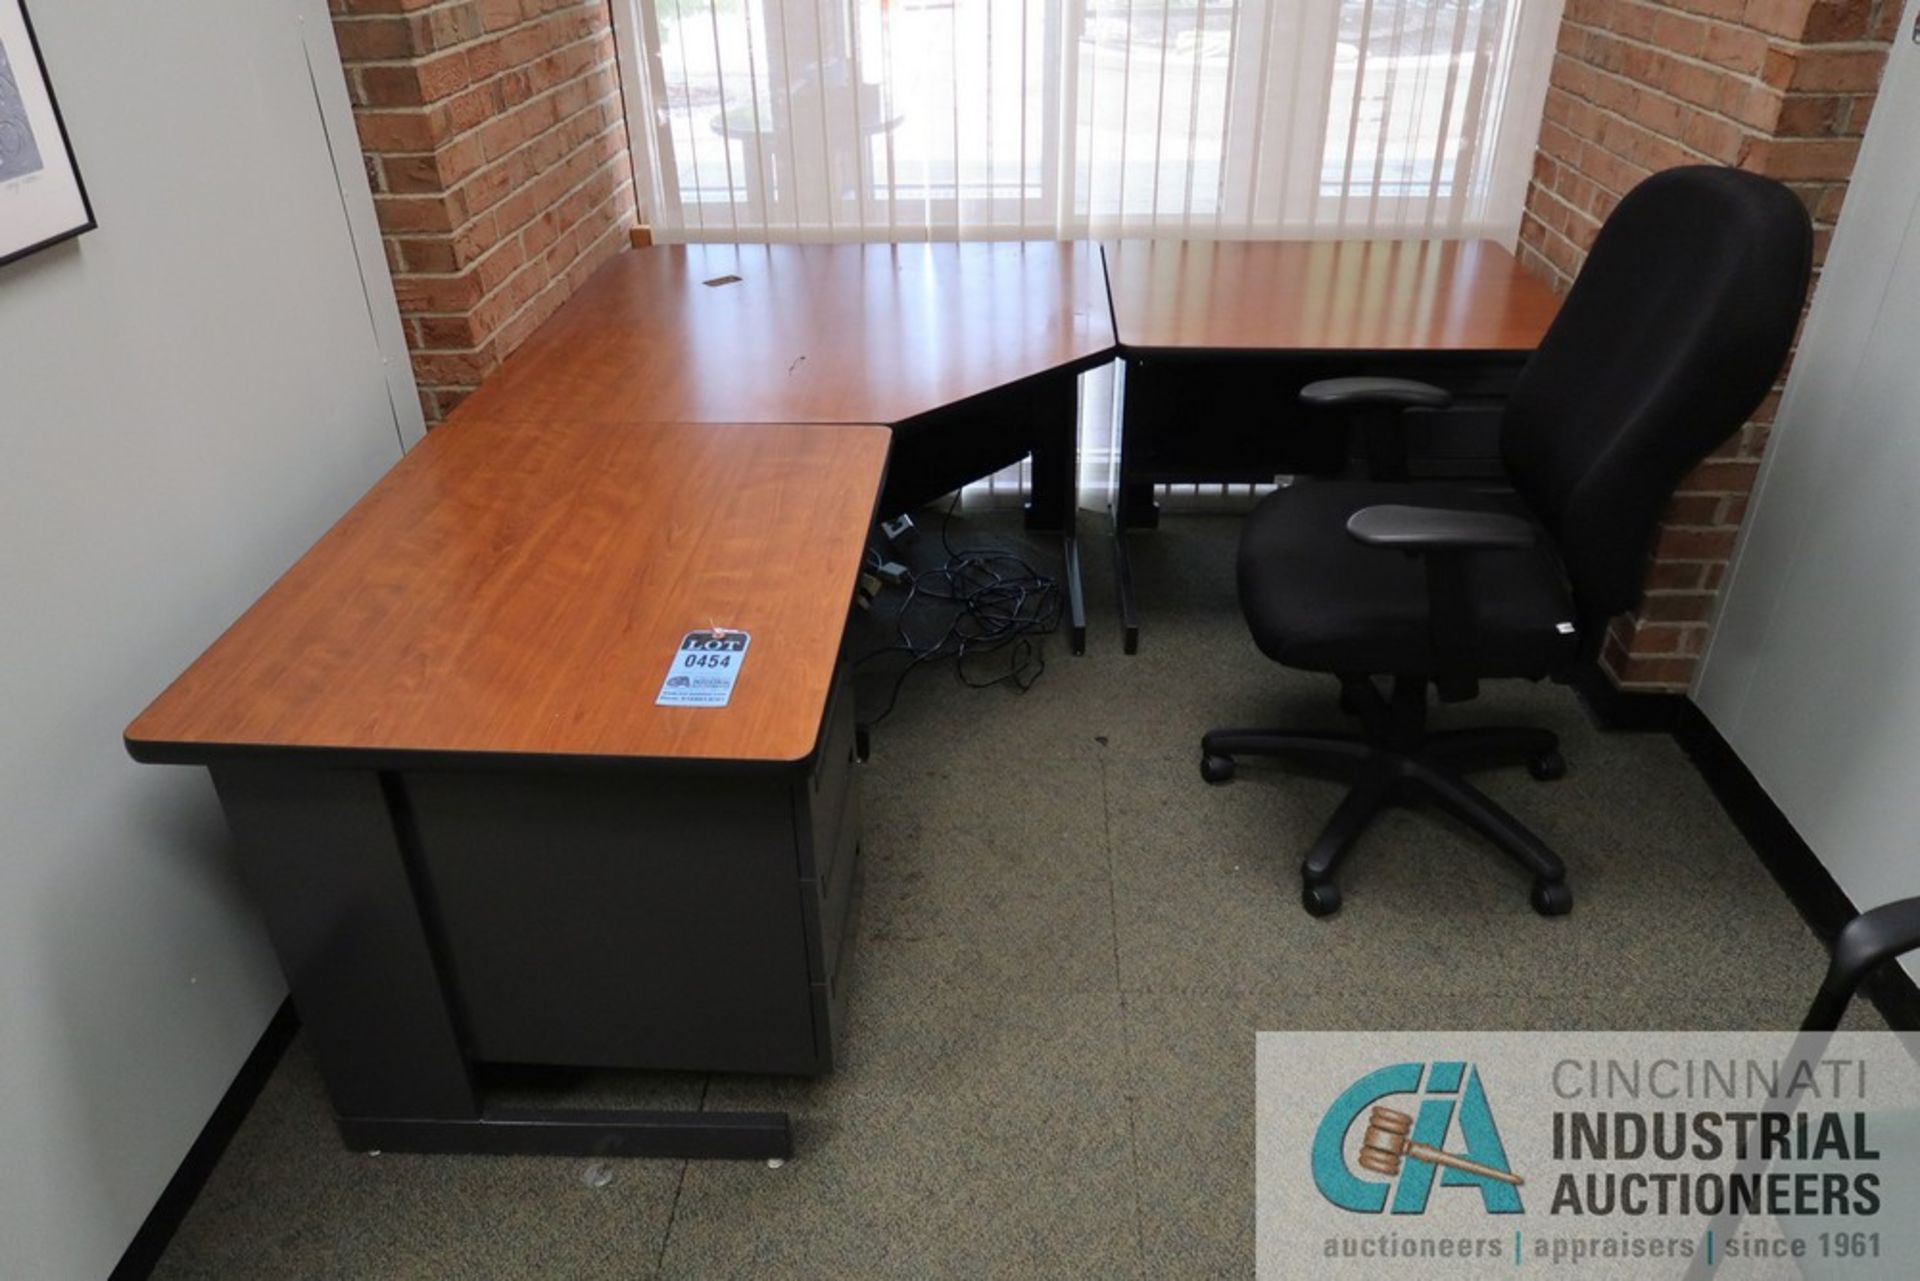 (LOT) CONTENTS OF OFFICE L-SHAPED DESK, 3' DIAMETER TABLE, 2-DRAWER CABINET - Image 2 of 3